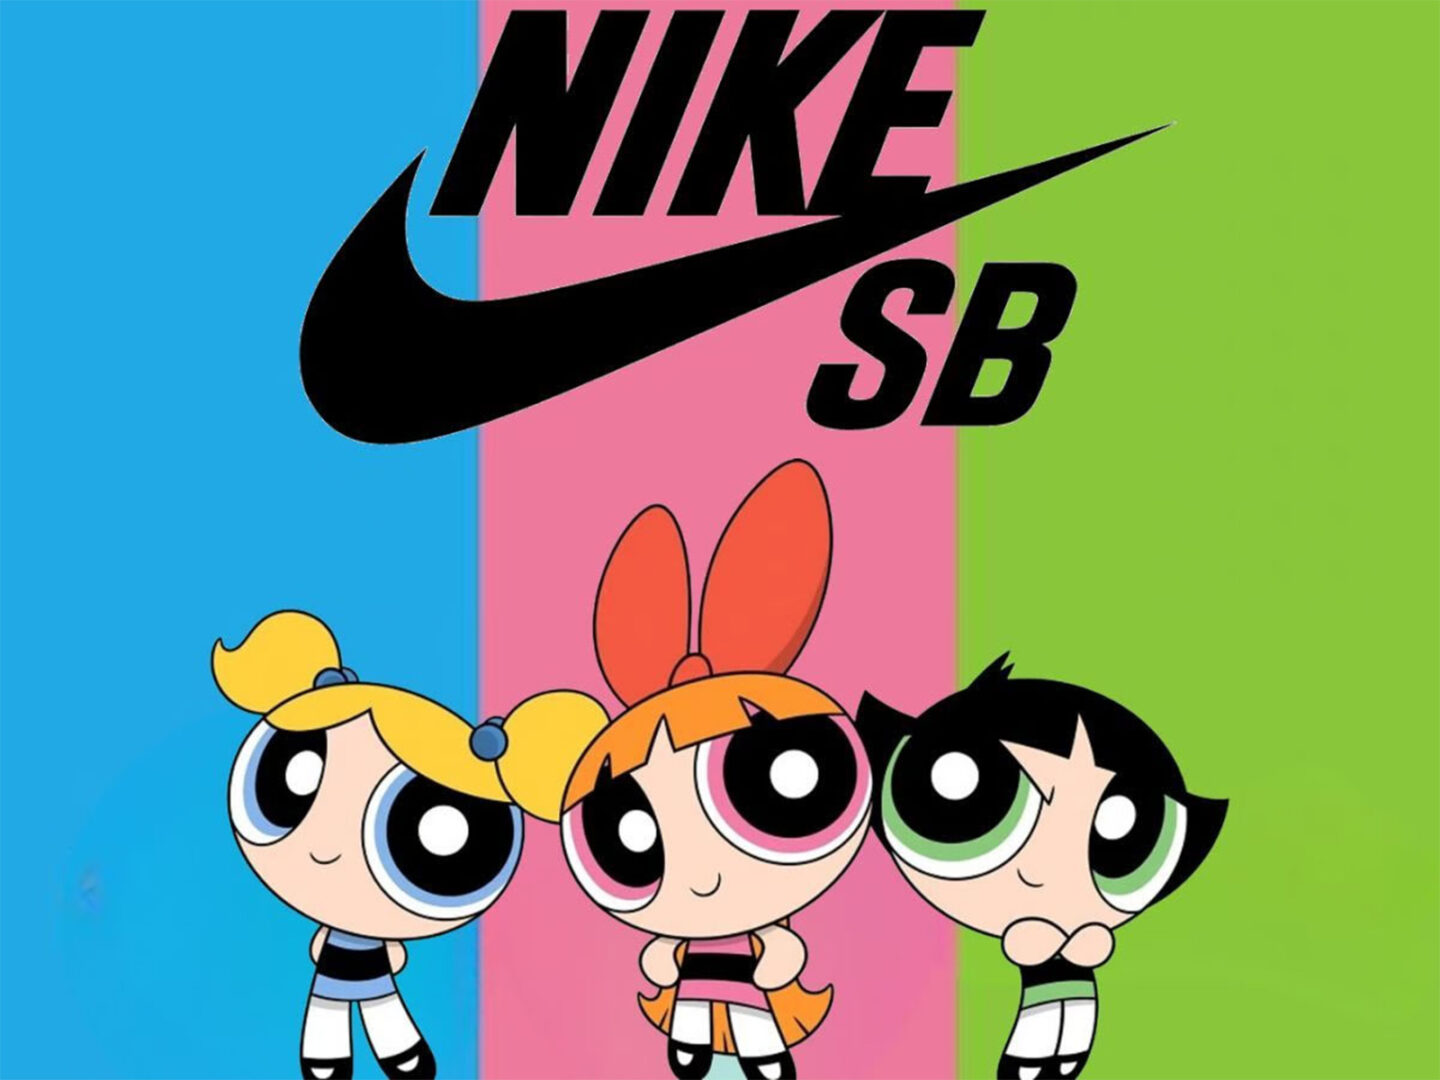 More images of the Nike SB Dunk Low x The Powerpuff Girls